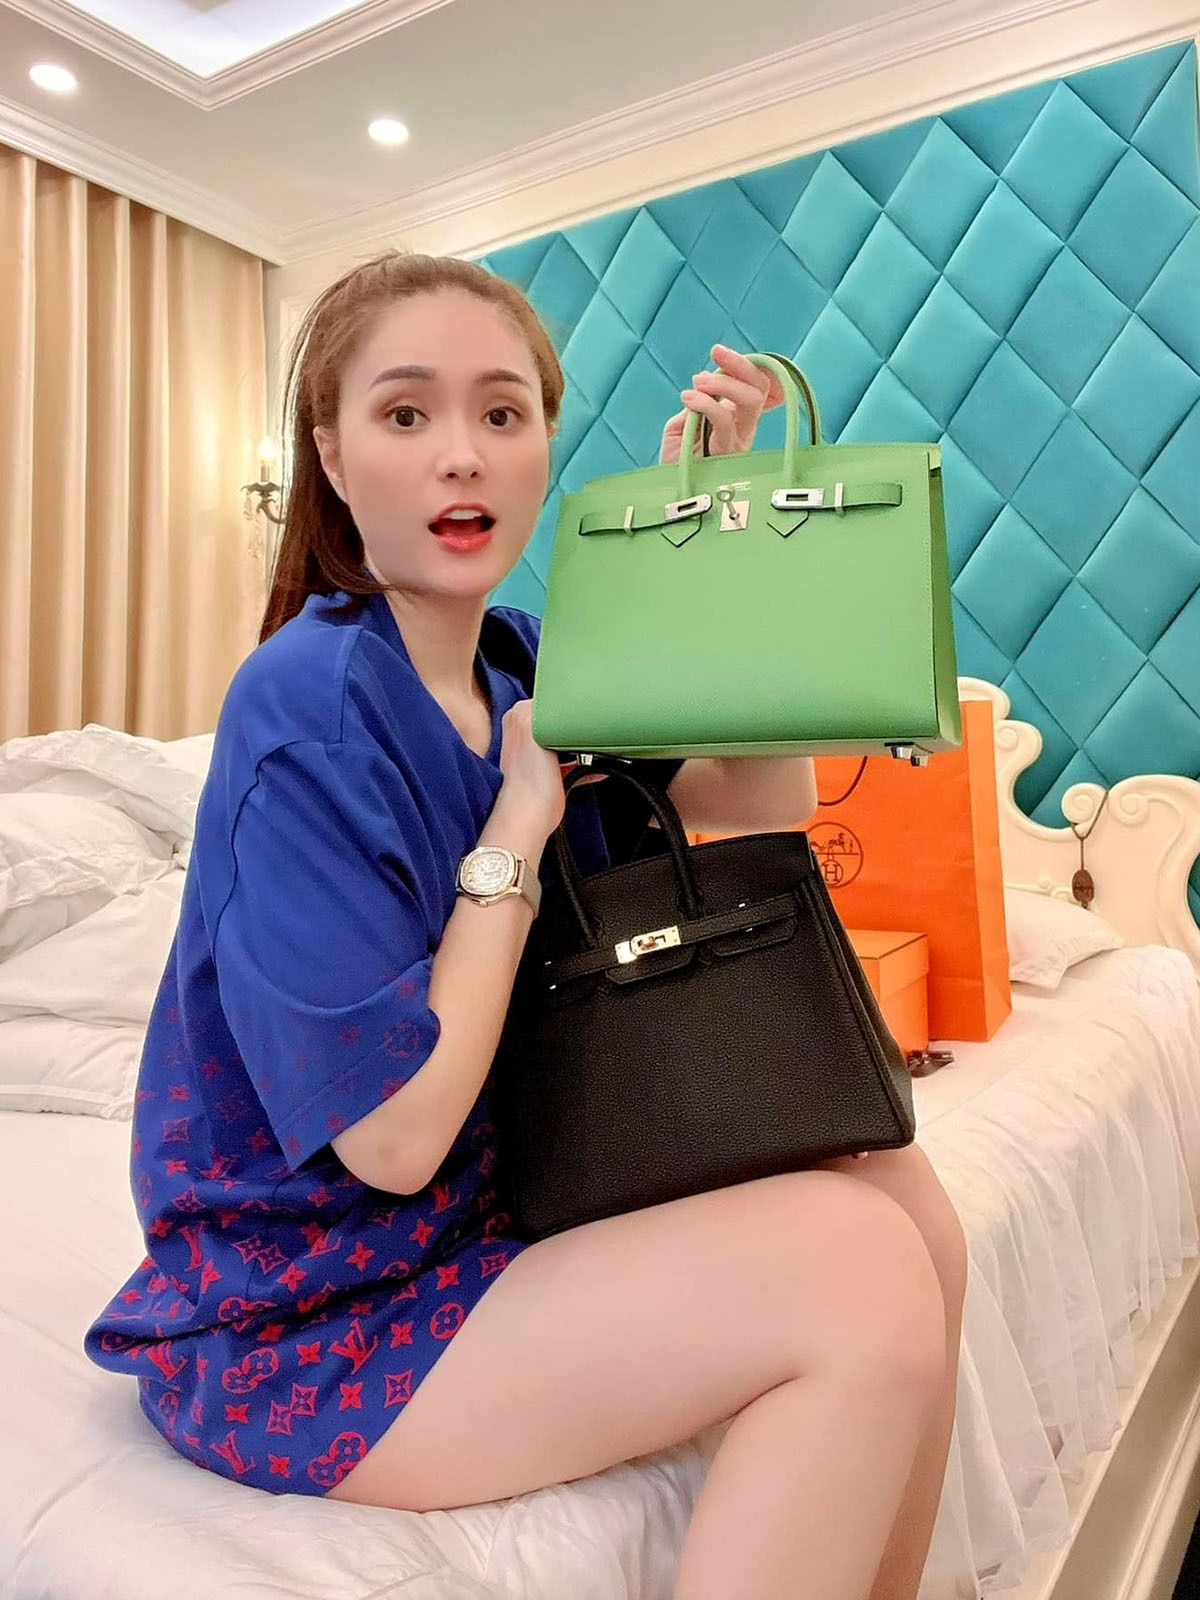 The beautiful sisters made money by investing in branded goods: The person who made a profit of 3 billion after 3 months, the person who had just recovered from the illness rushed to close the Hermes order and wait for the date x2 price - Photo 1.